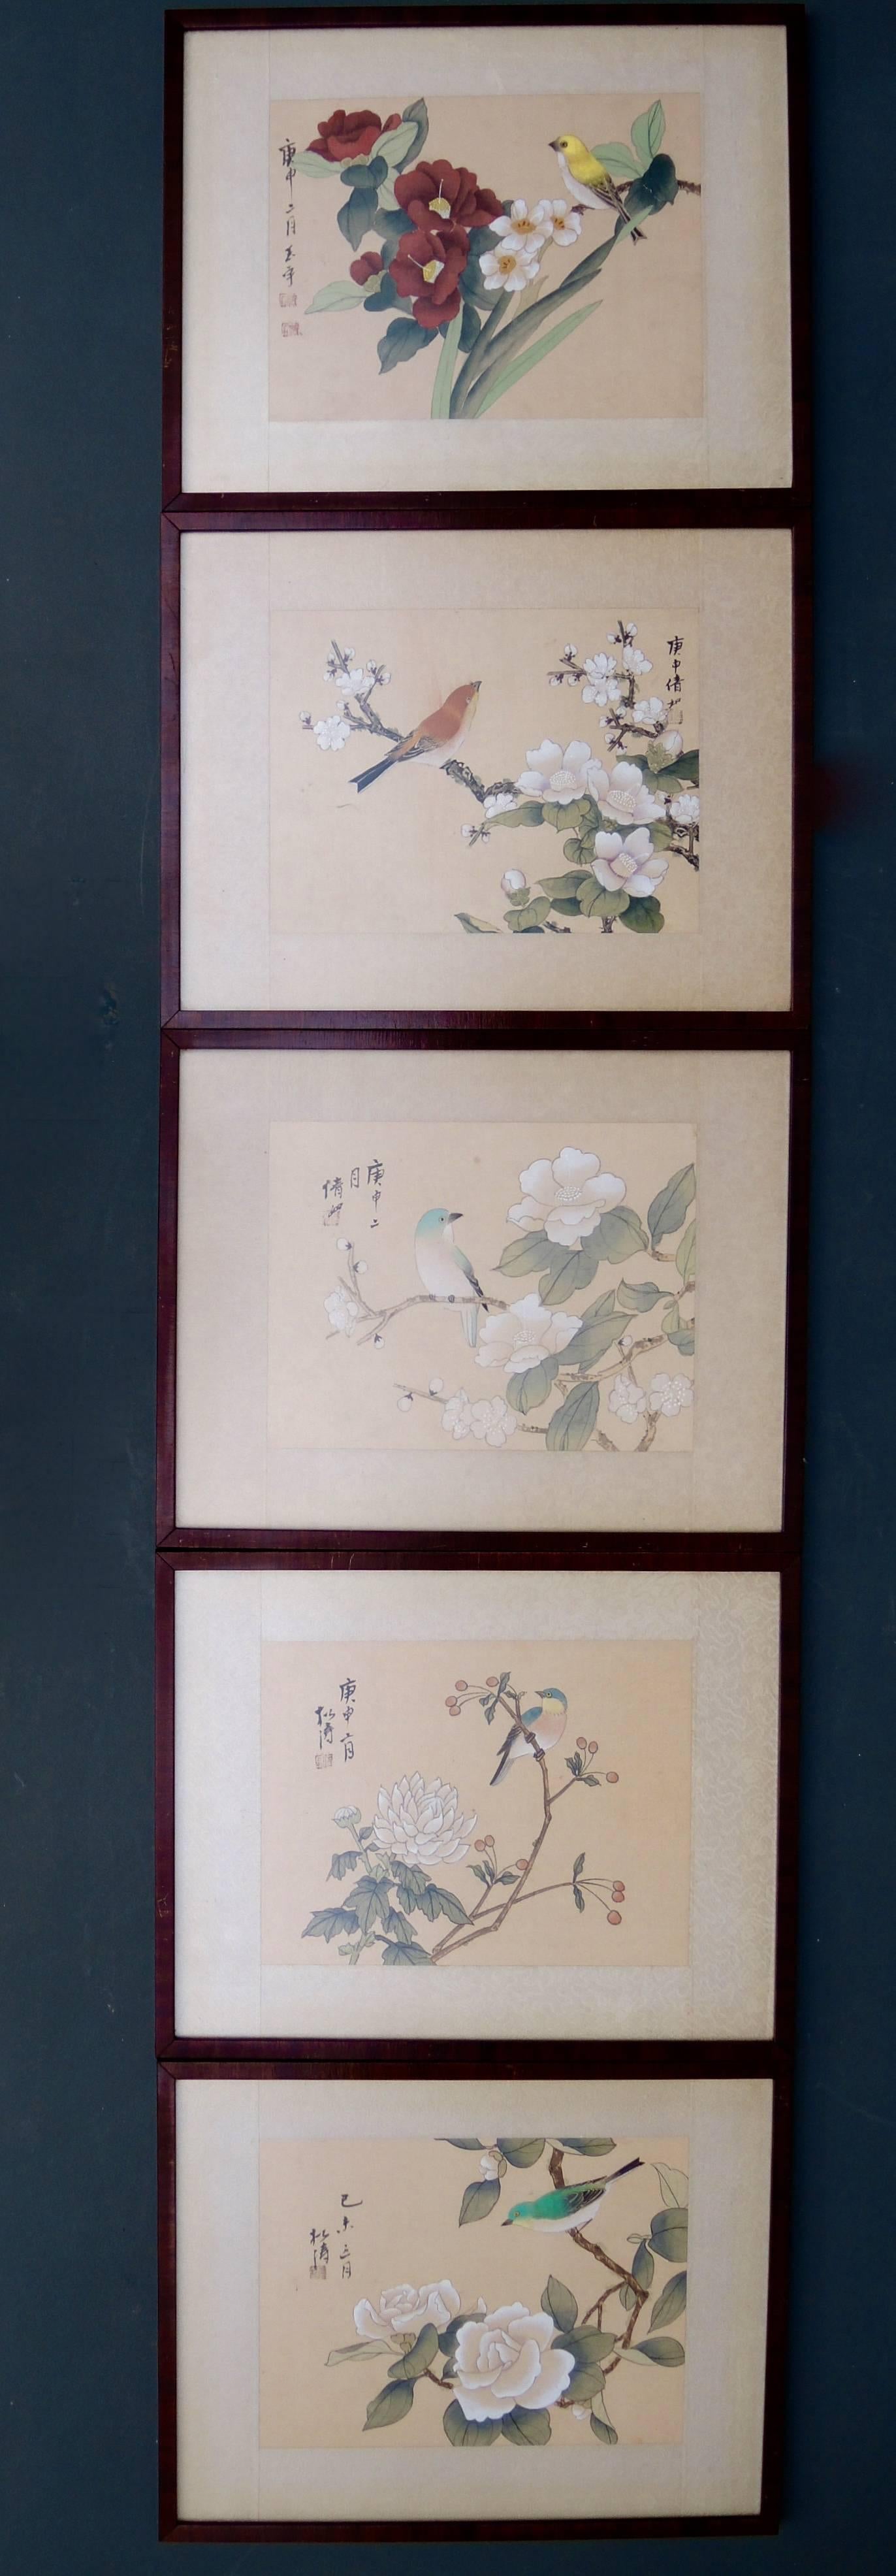 20th Century Five Vintage Chinoiserie Style Chinese Paintings of Birds and Flowers on Silk